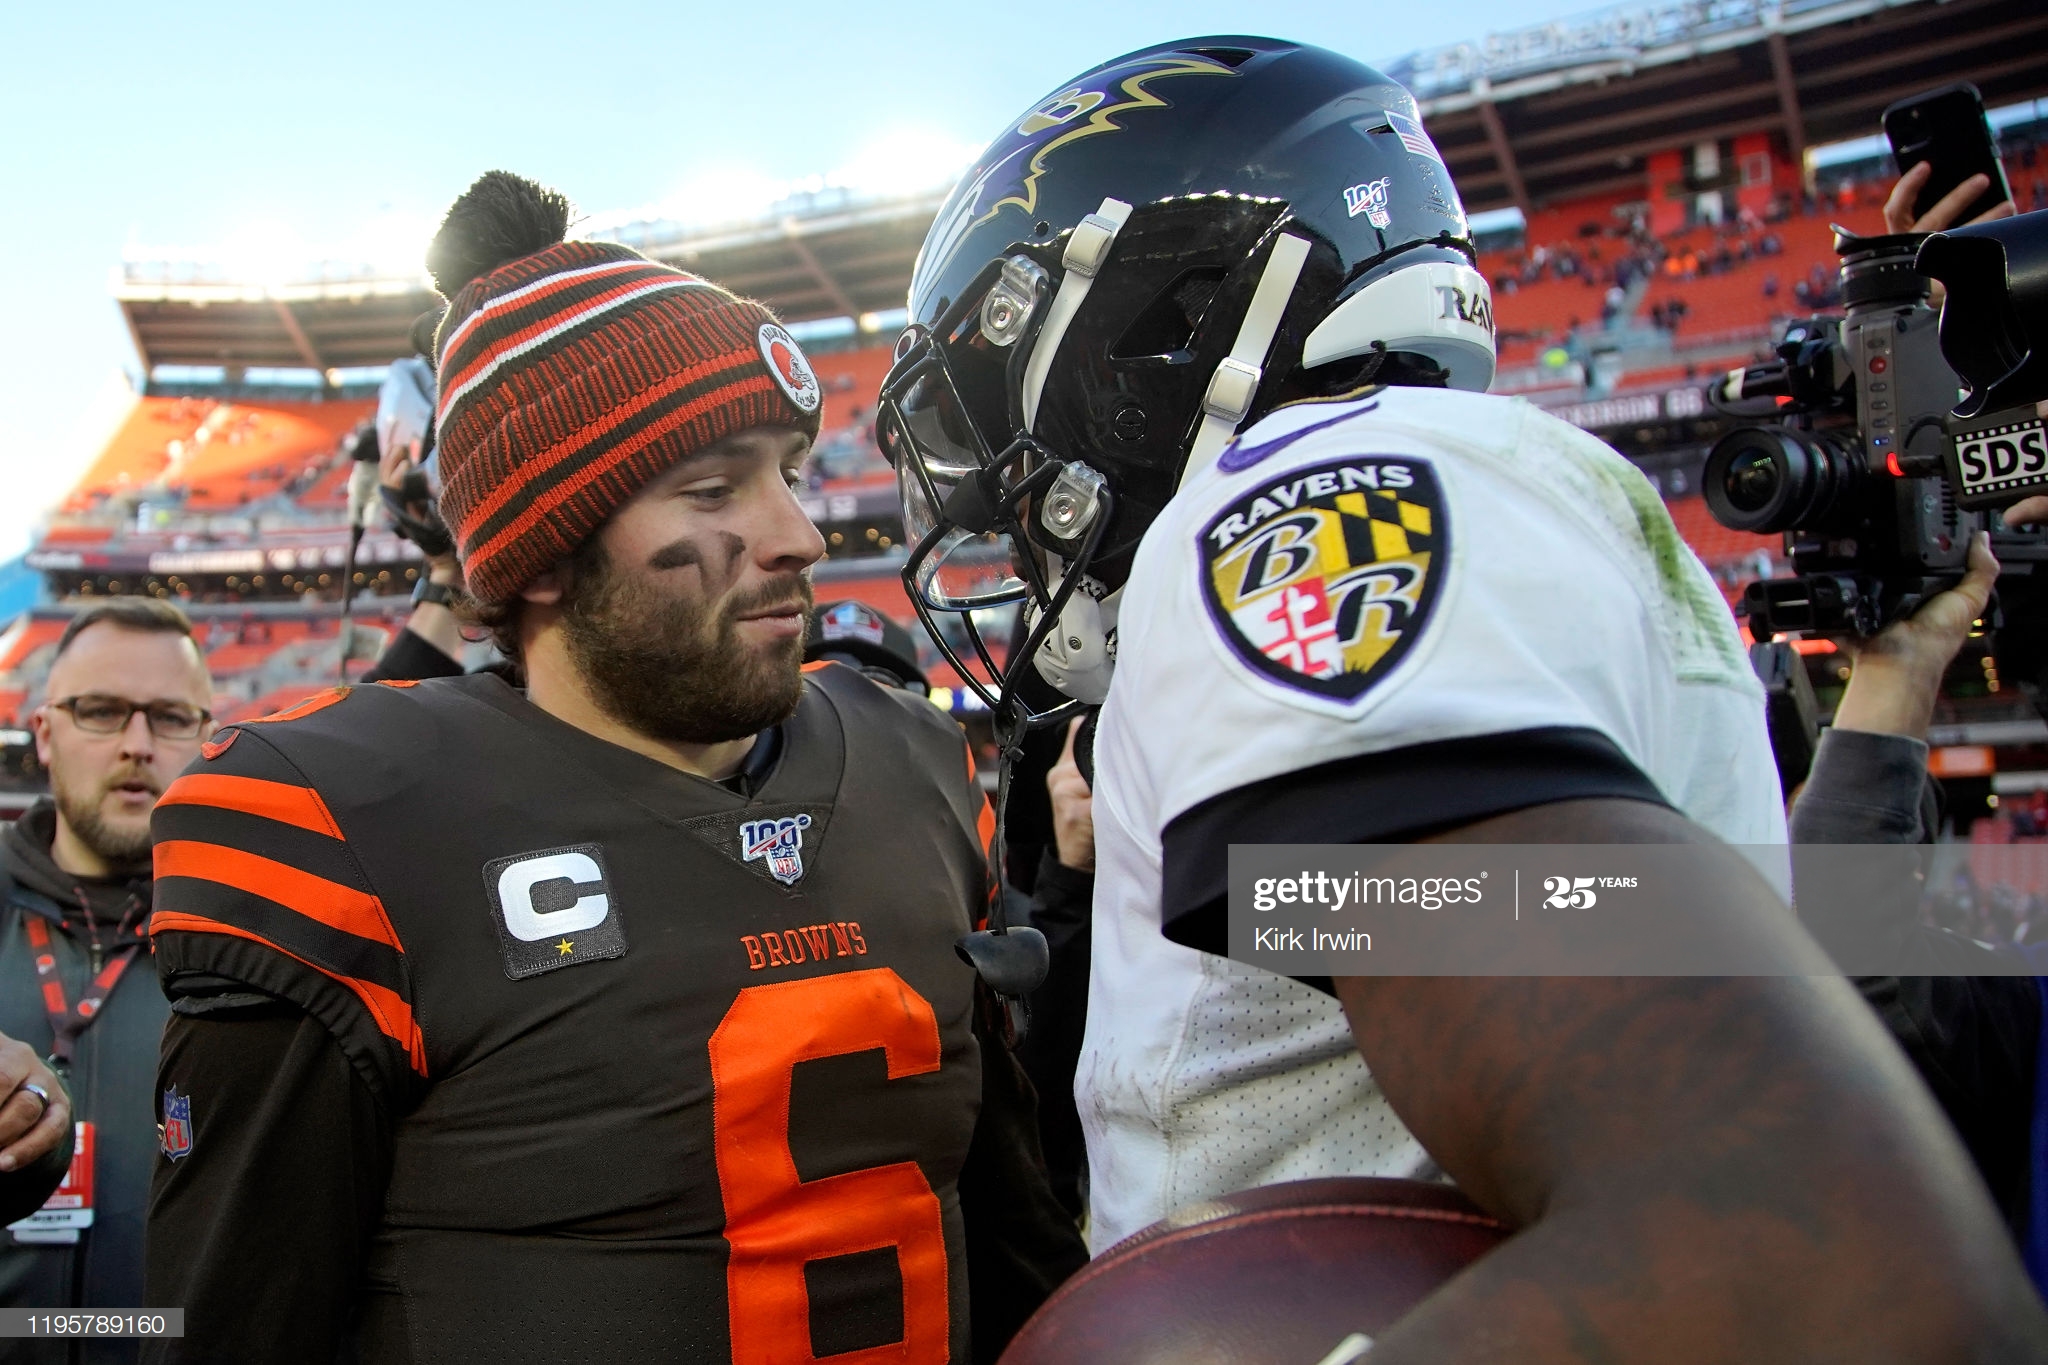 NFL rumors: Baker Mayfield to Steelers if Browns QB hits free agency